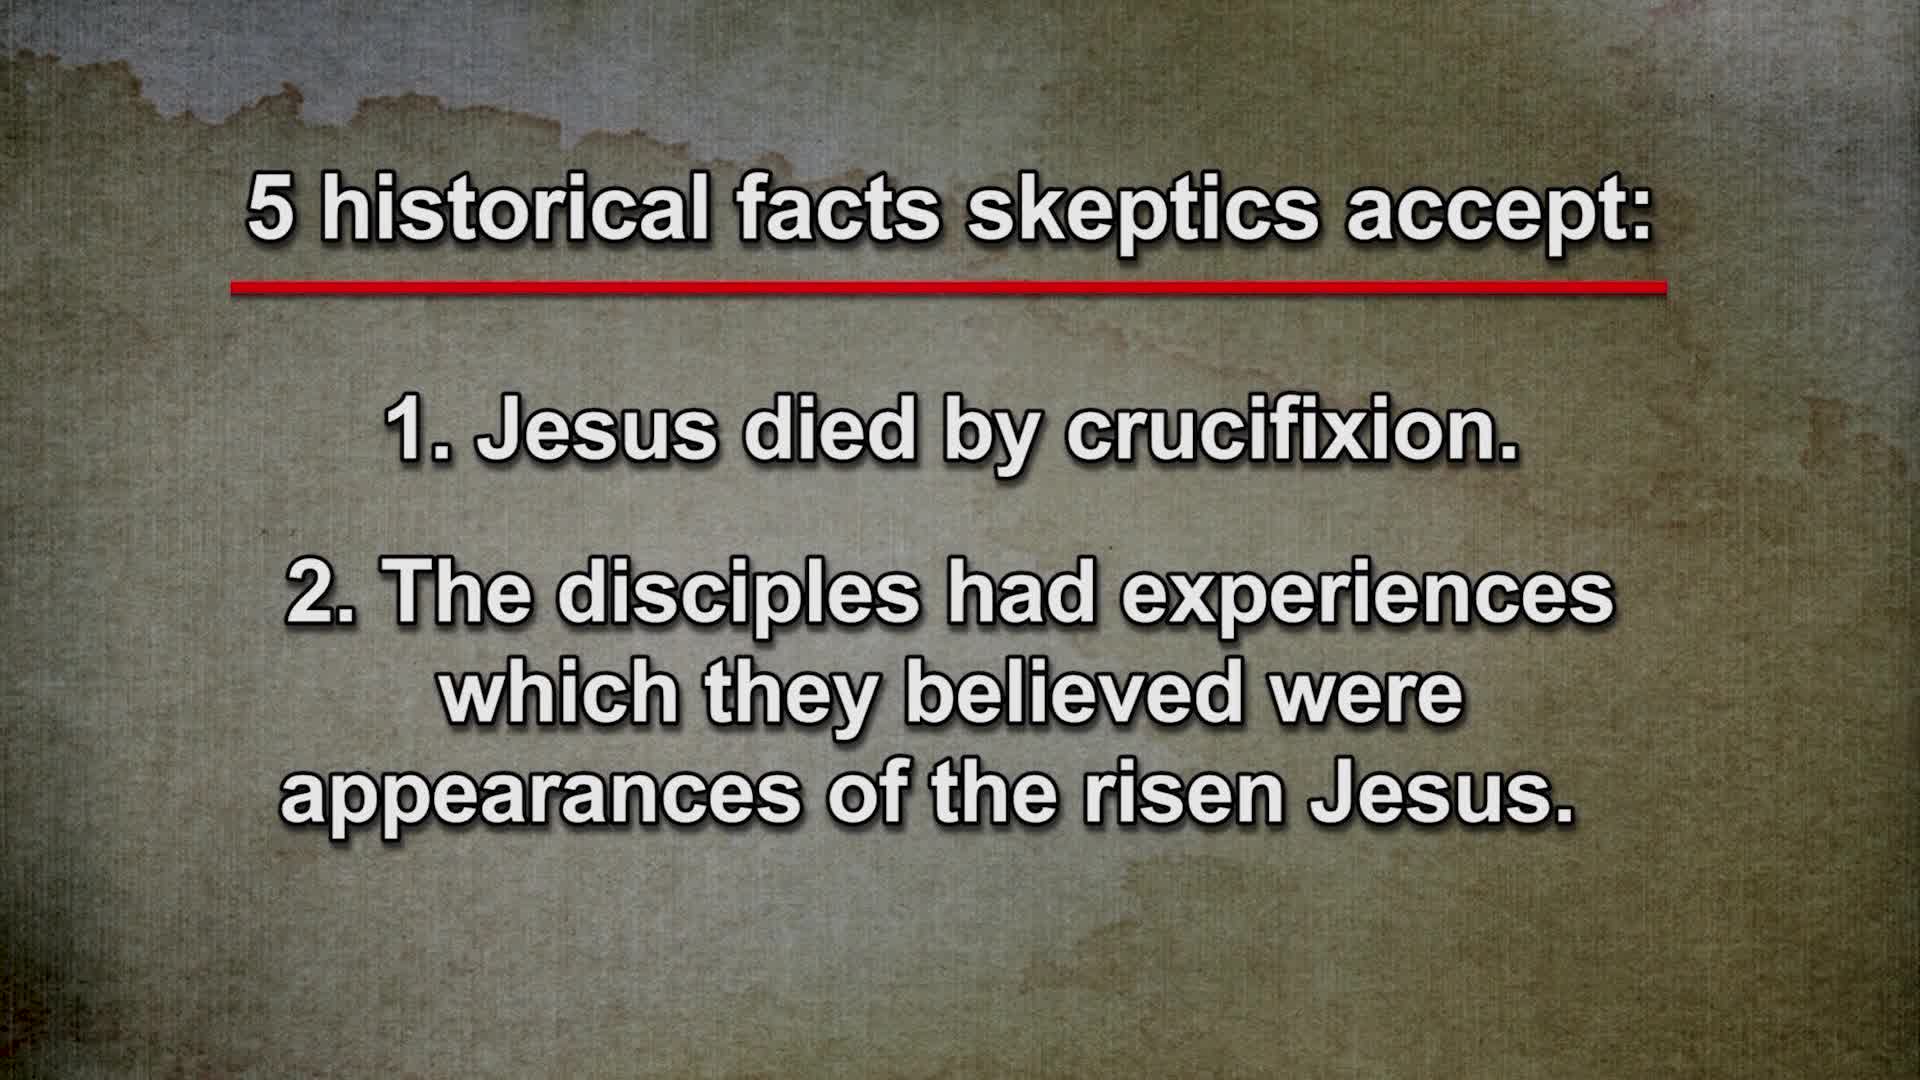 What historical facts about the resurrection will even skeptics accept?